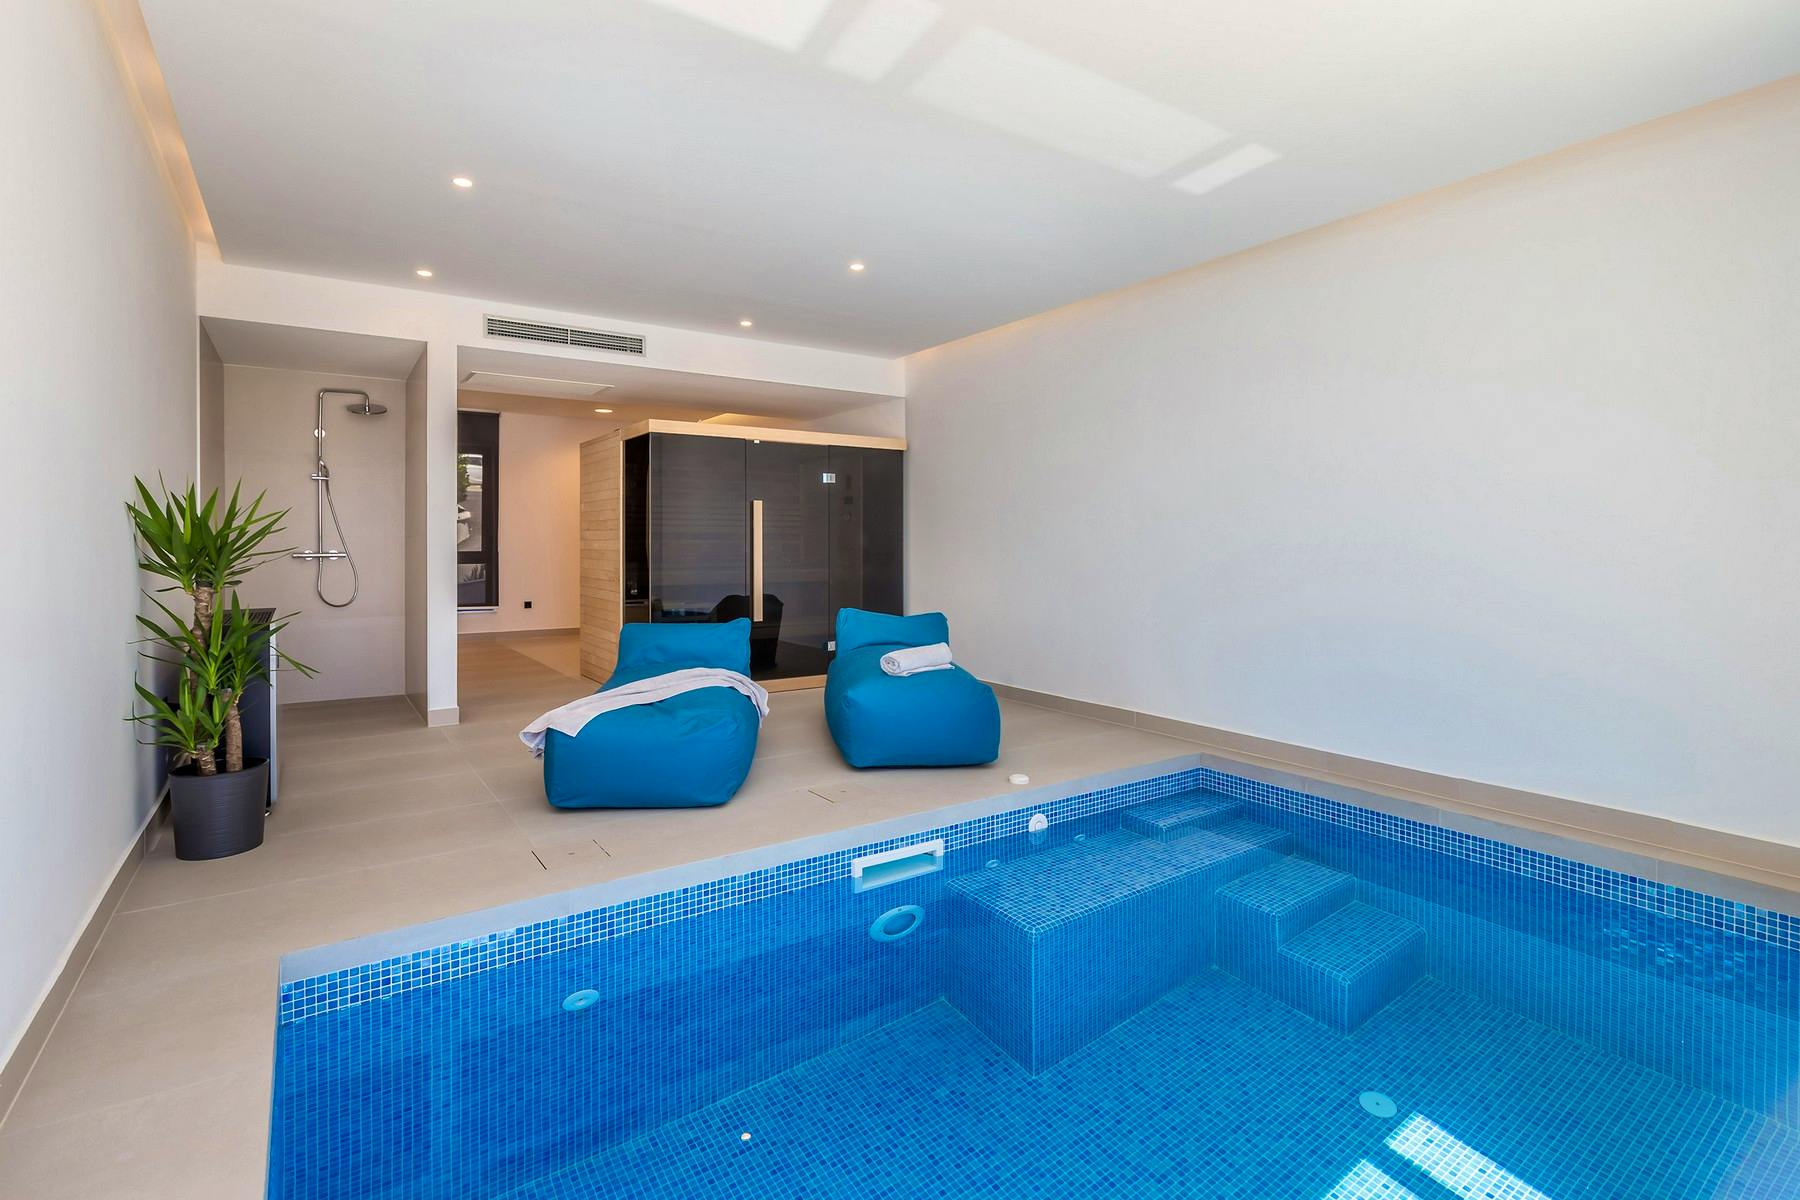 Wellness area with inner pool, lounge area sauna, and shower 